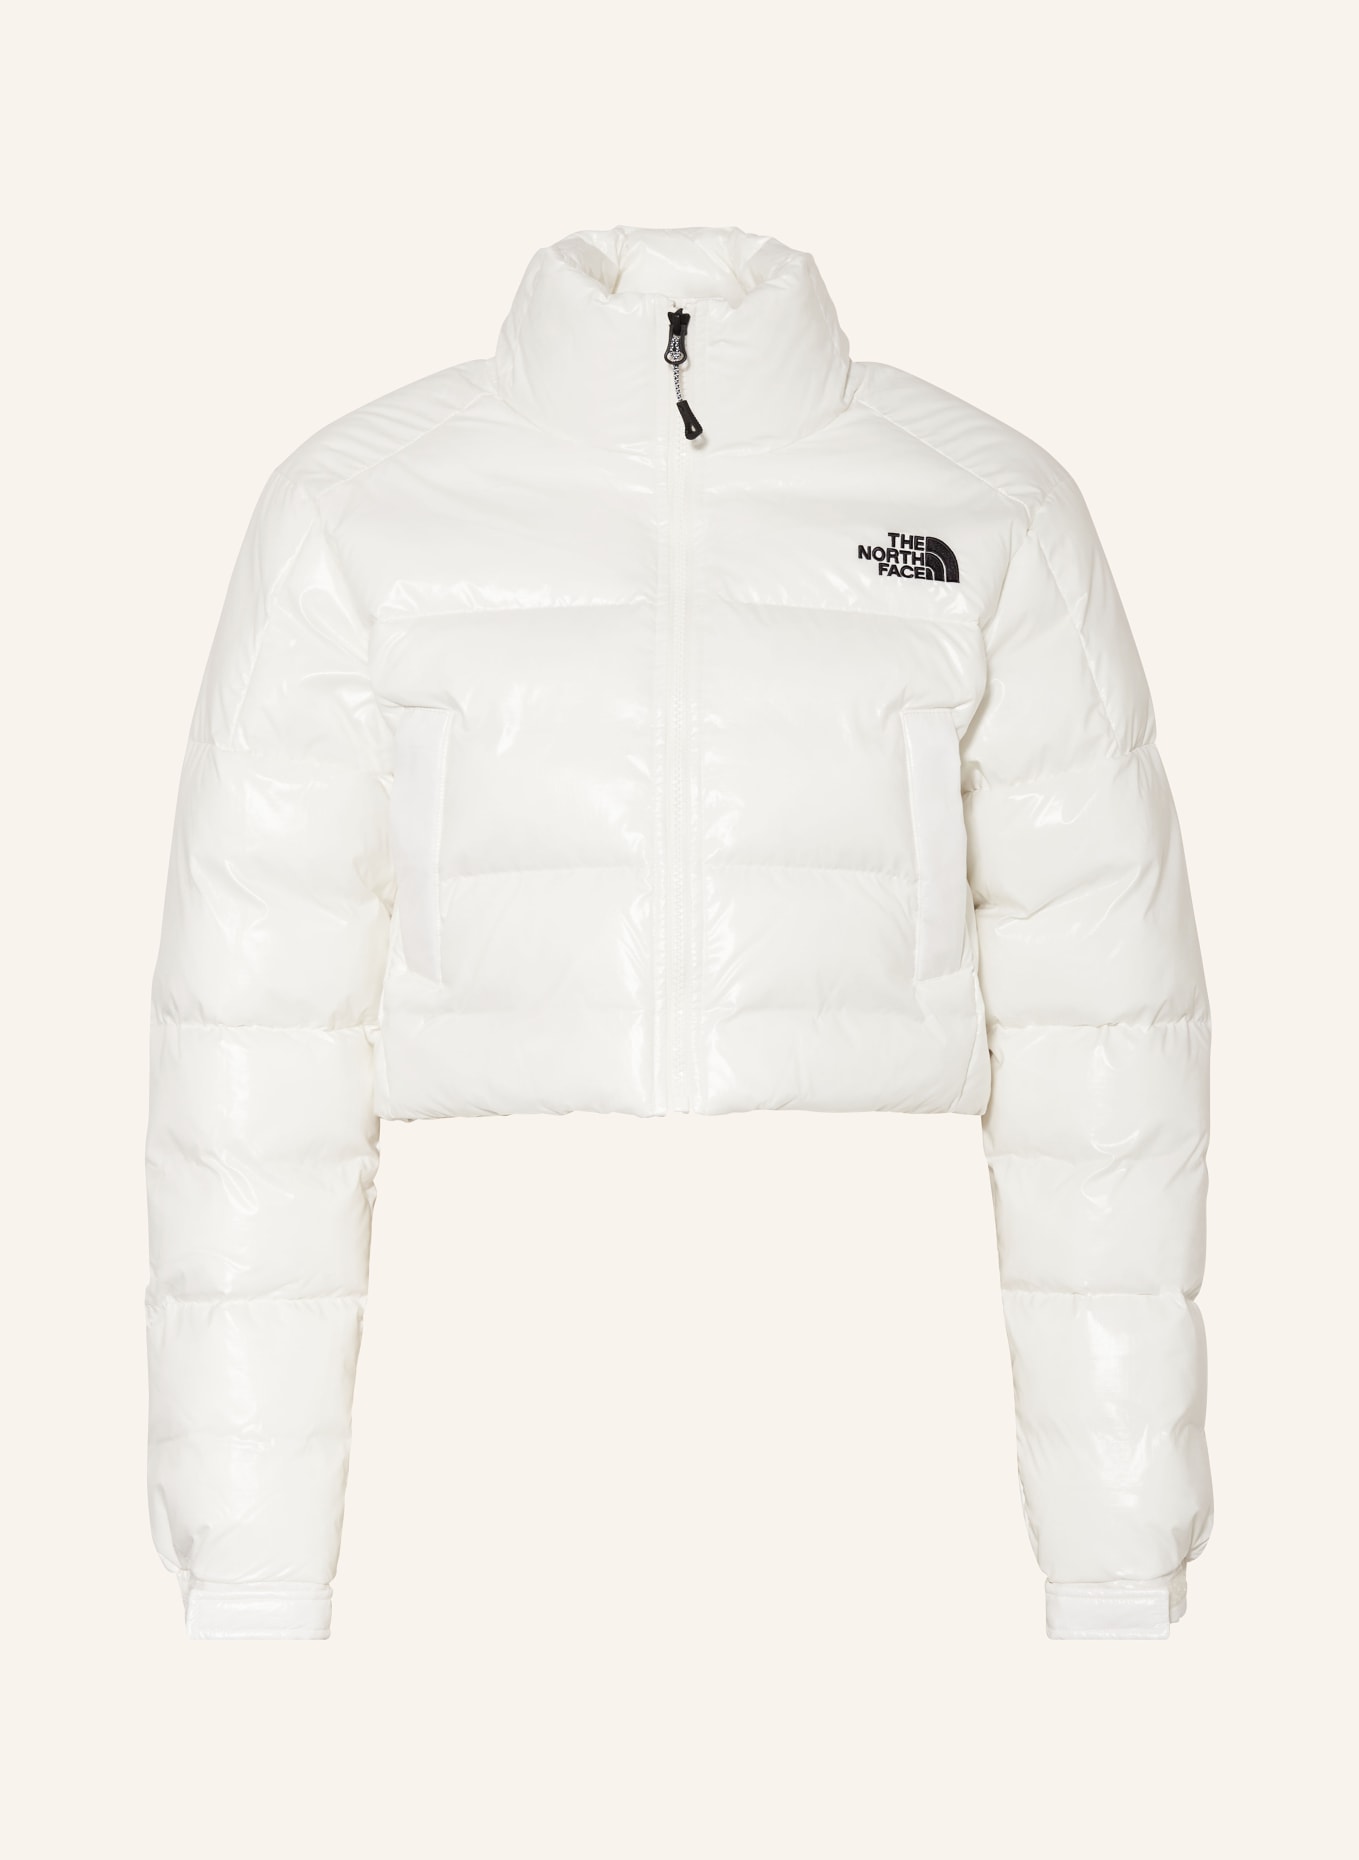 THE NORTH FACE Cropped-Steppjacke RUSTA 2.0, Farbe: WEISS (Bild 1)